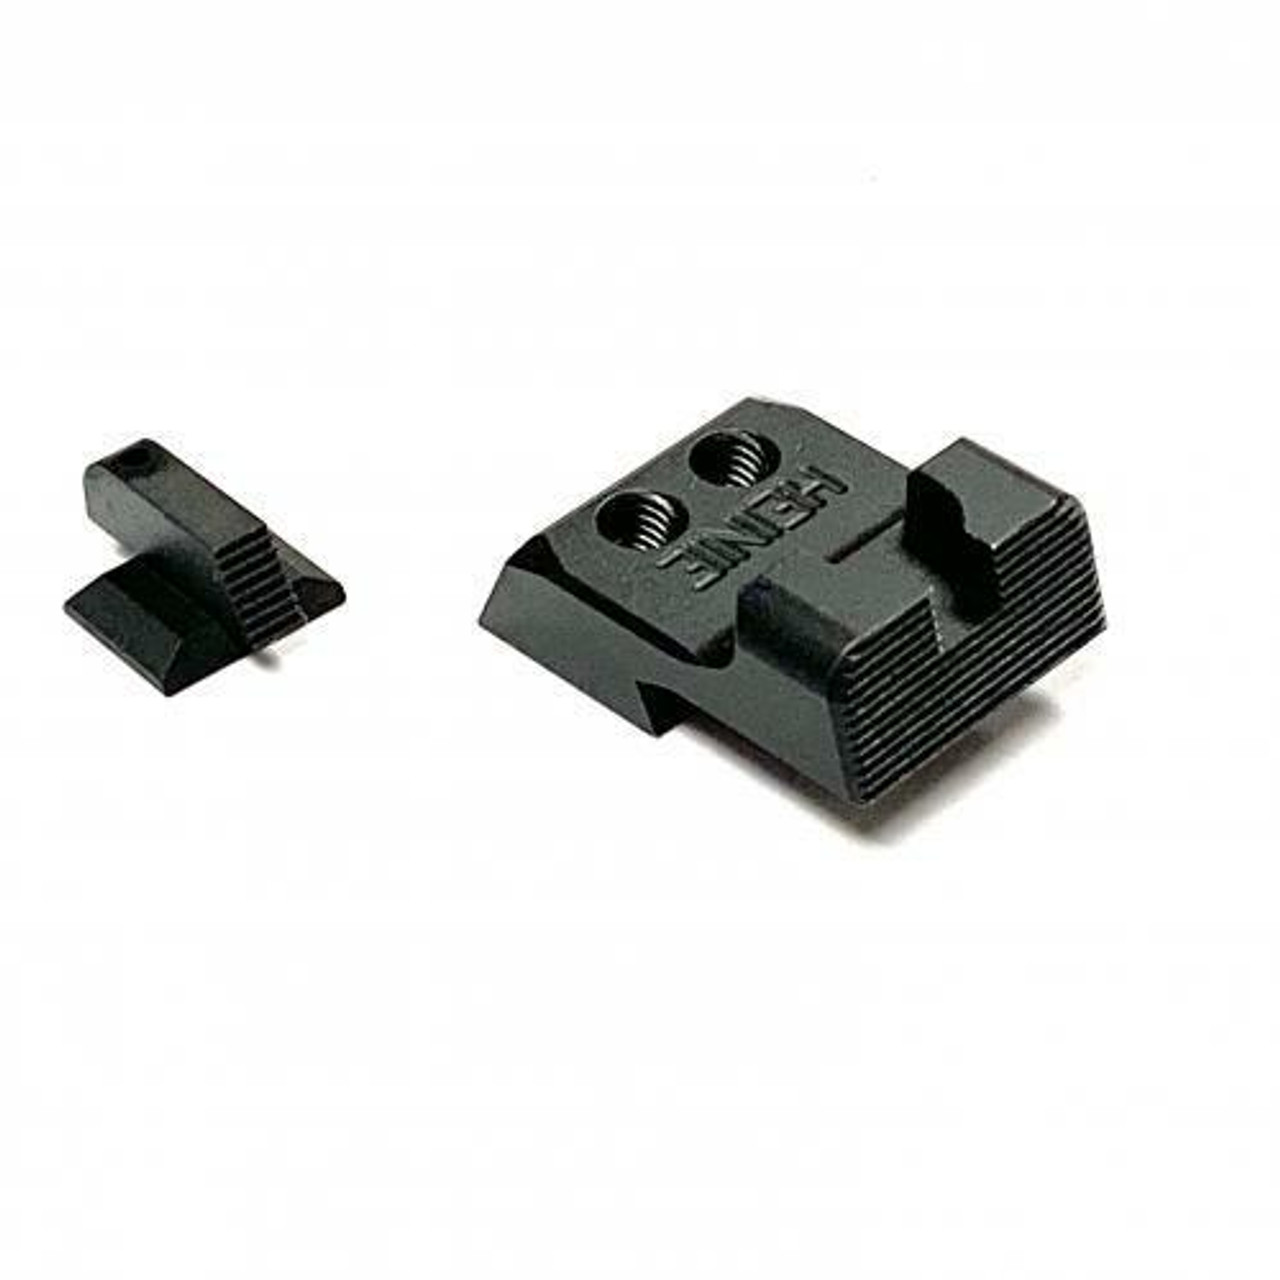 Heinie Ledge Tactical Black Sight Set for Dan Wesson 1911 and Commander